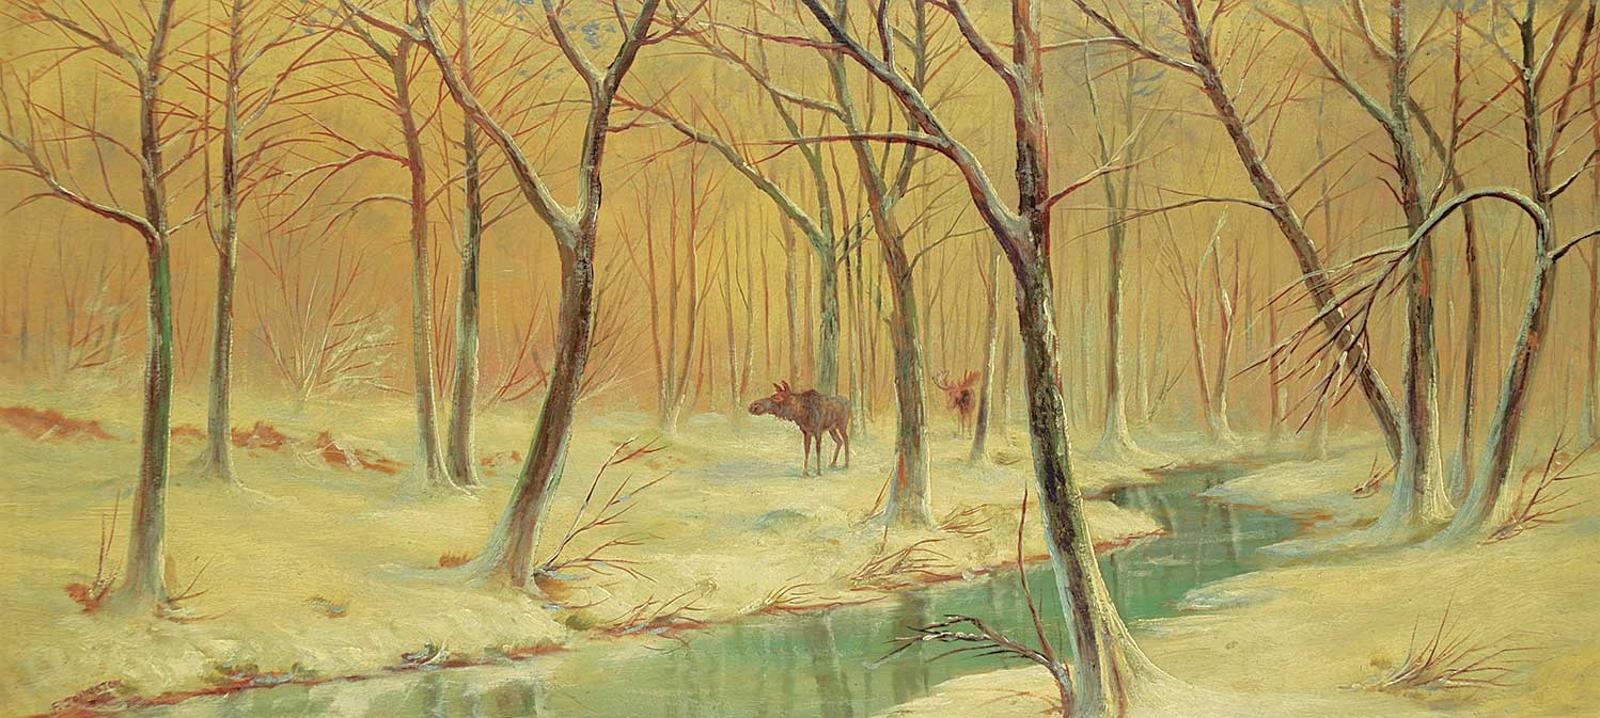 F. Johnston - Untitled - Moose by a Winter Stream